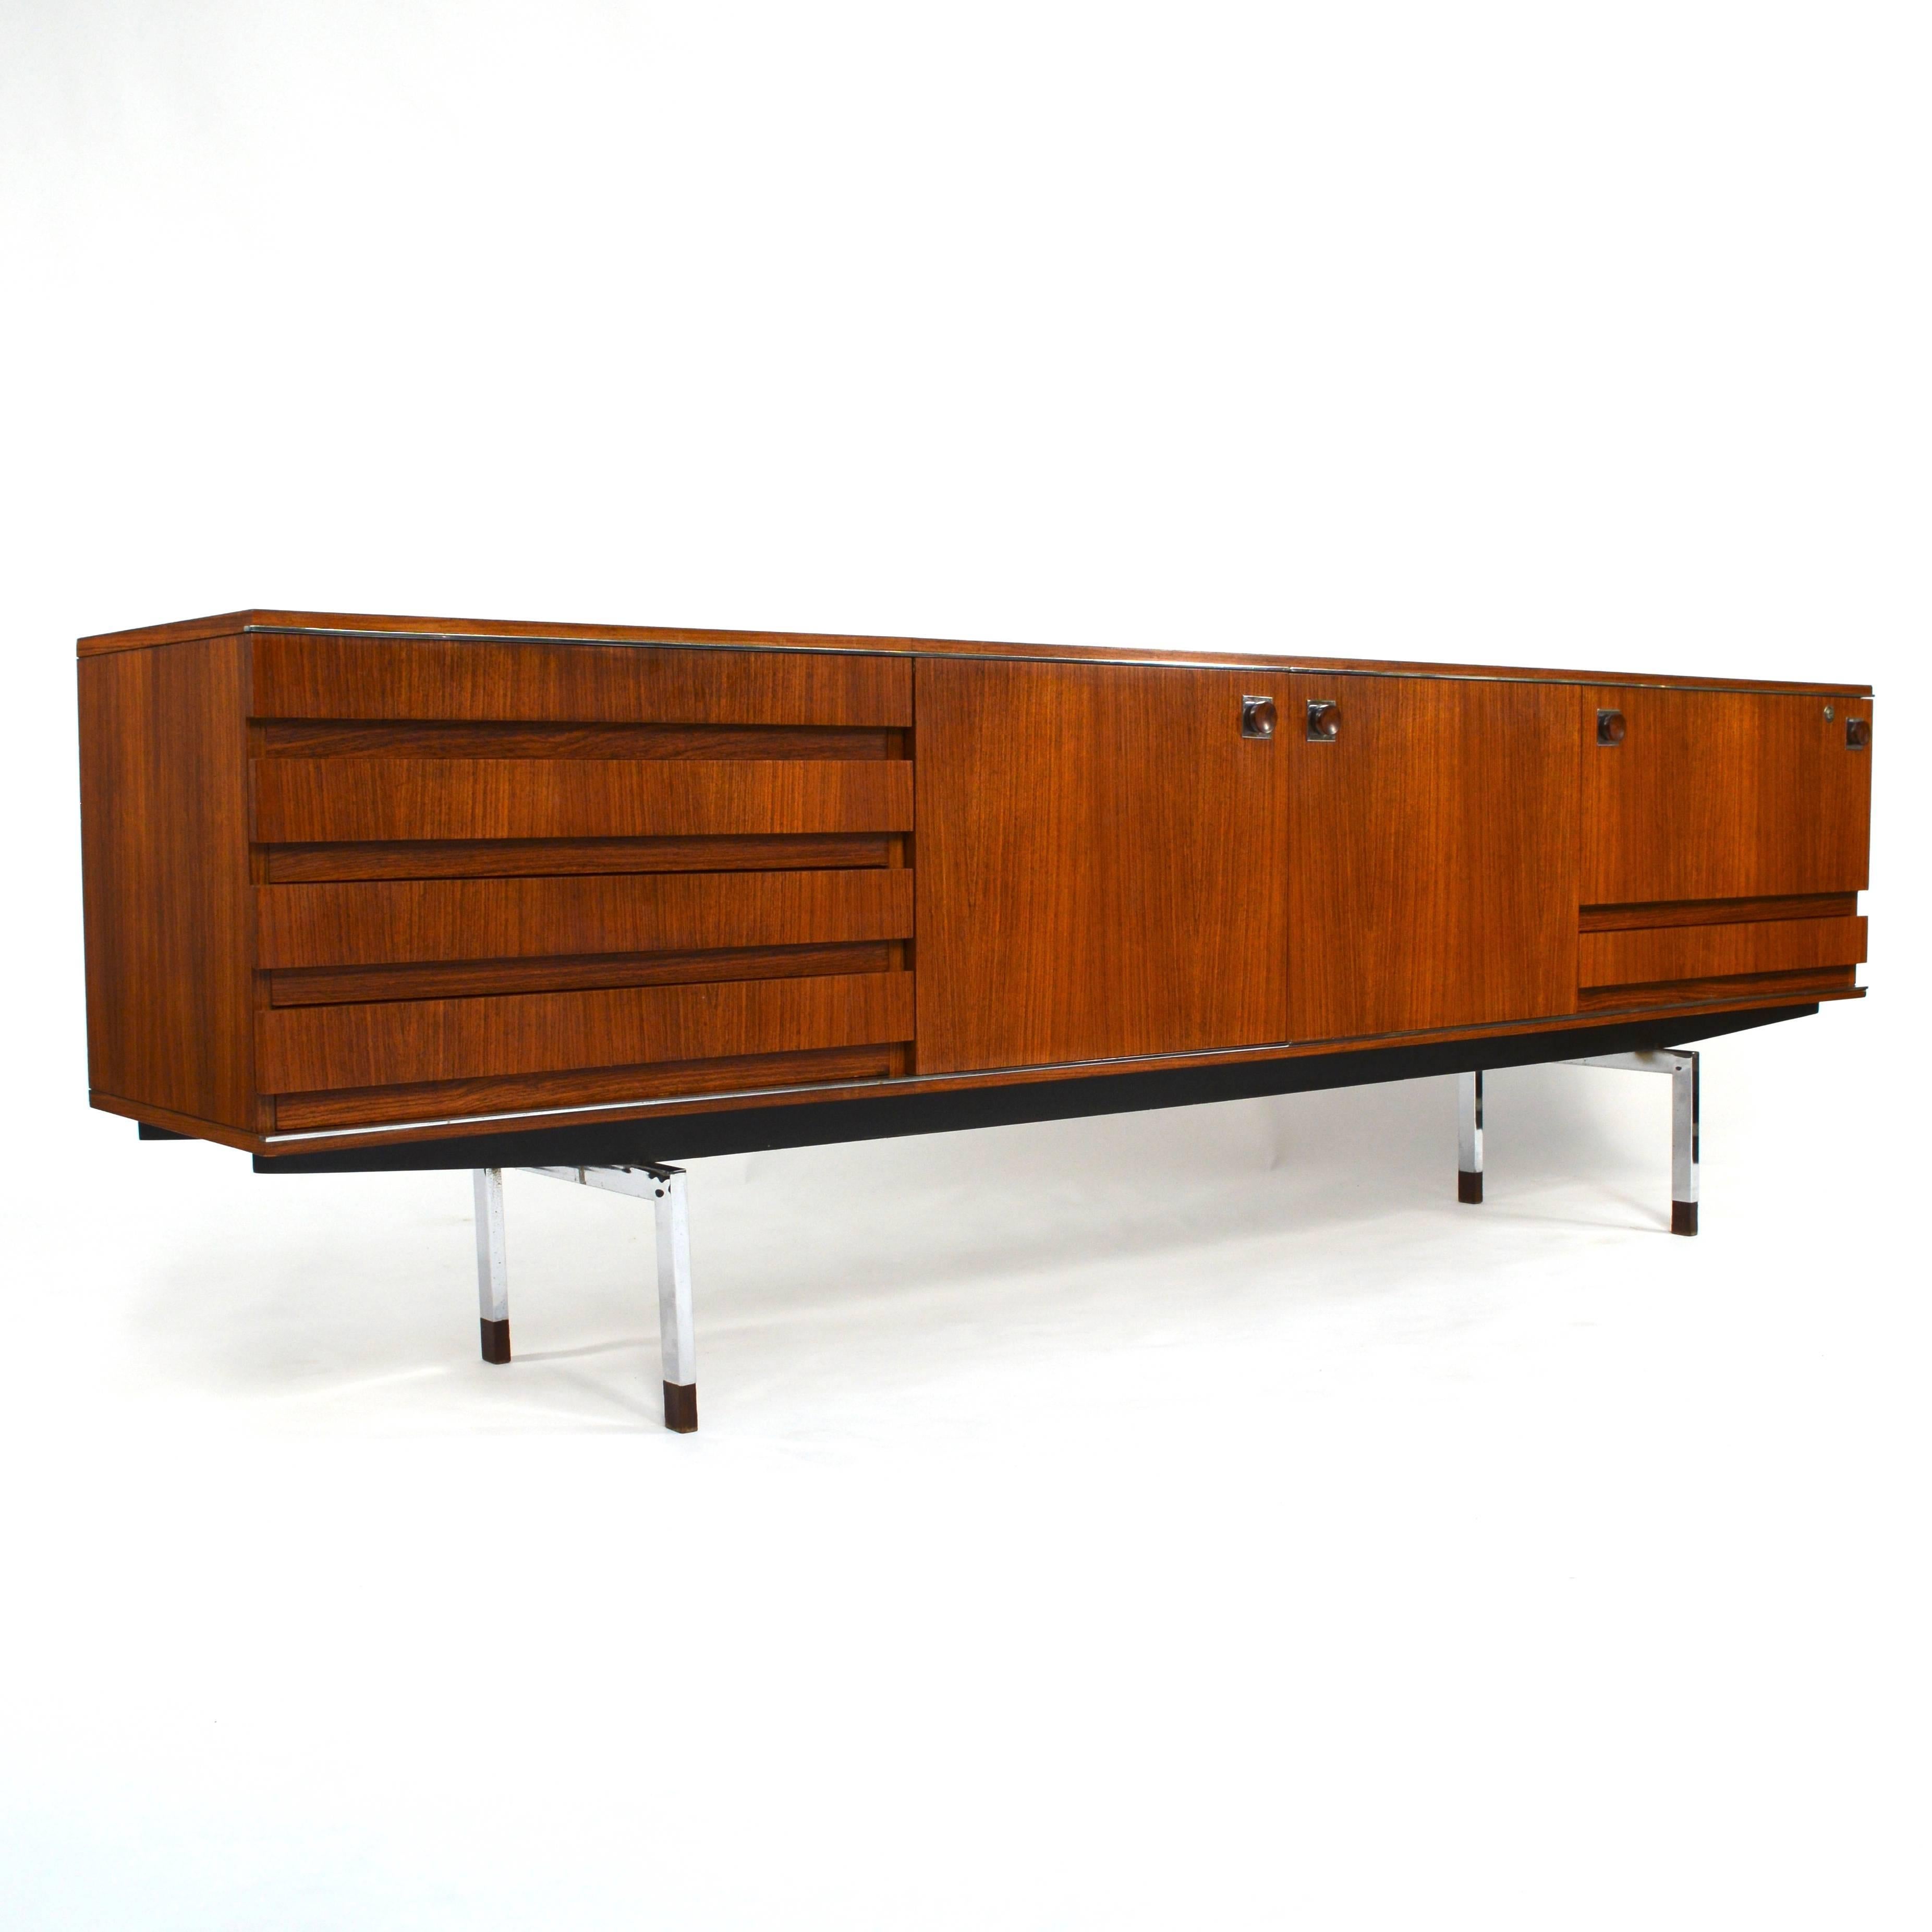 Large teak sideboard by the famous Belgium designer Alfred Hendrickx for Belform. 
Modernistic design with straight lines, beautiful chrome details and warm organic colored teak.
The sideboard is in very good condition with minor signs of use and